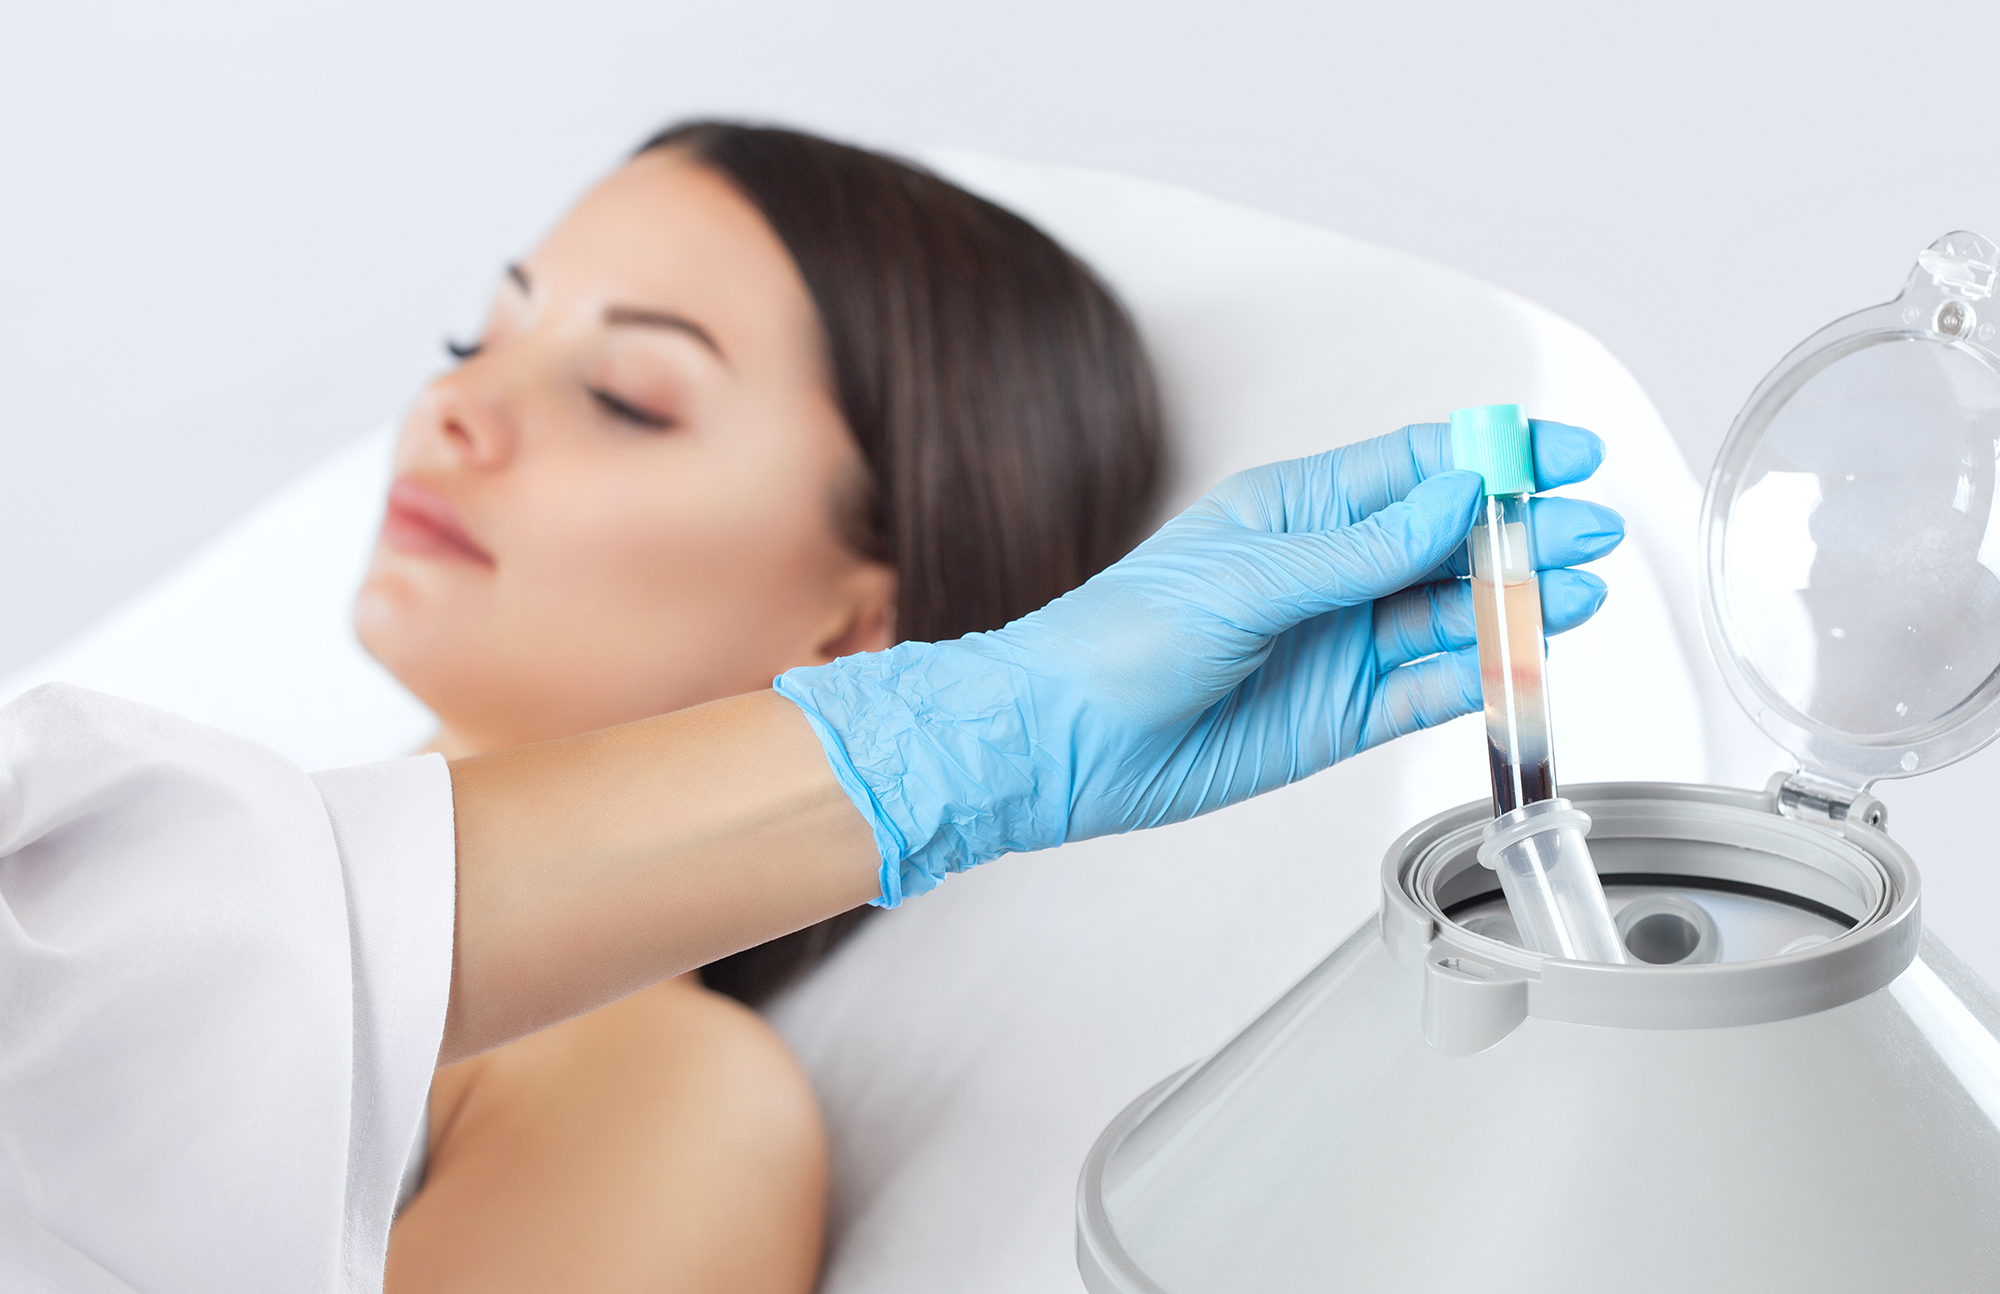 Insight Medical Imaging offers PRP injections in Edmonton